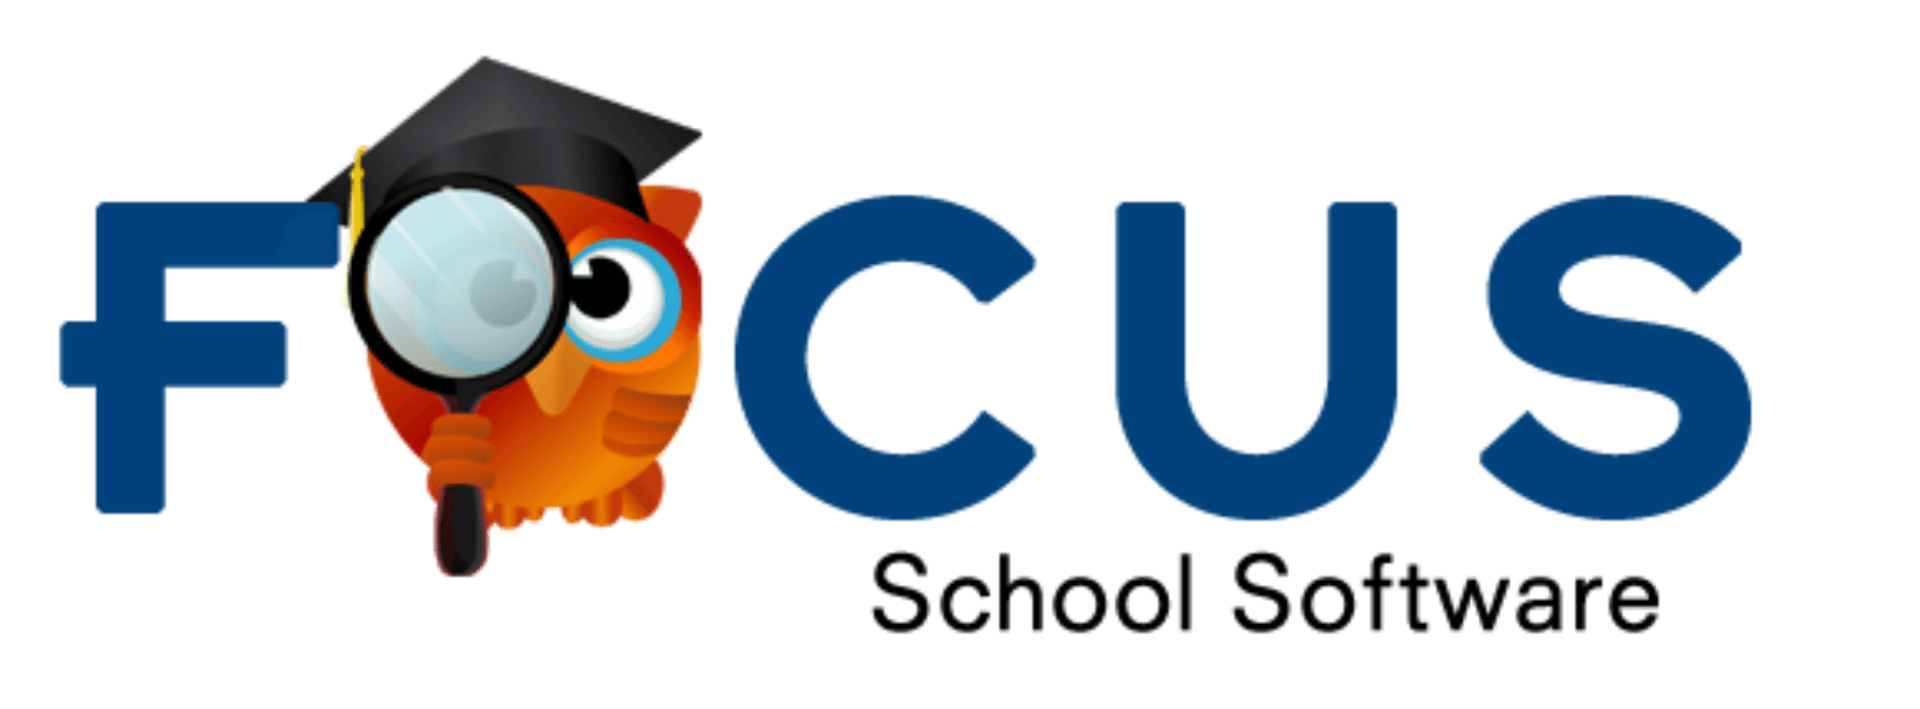 Image of Owl logo for Focus software